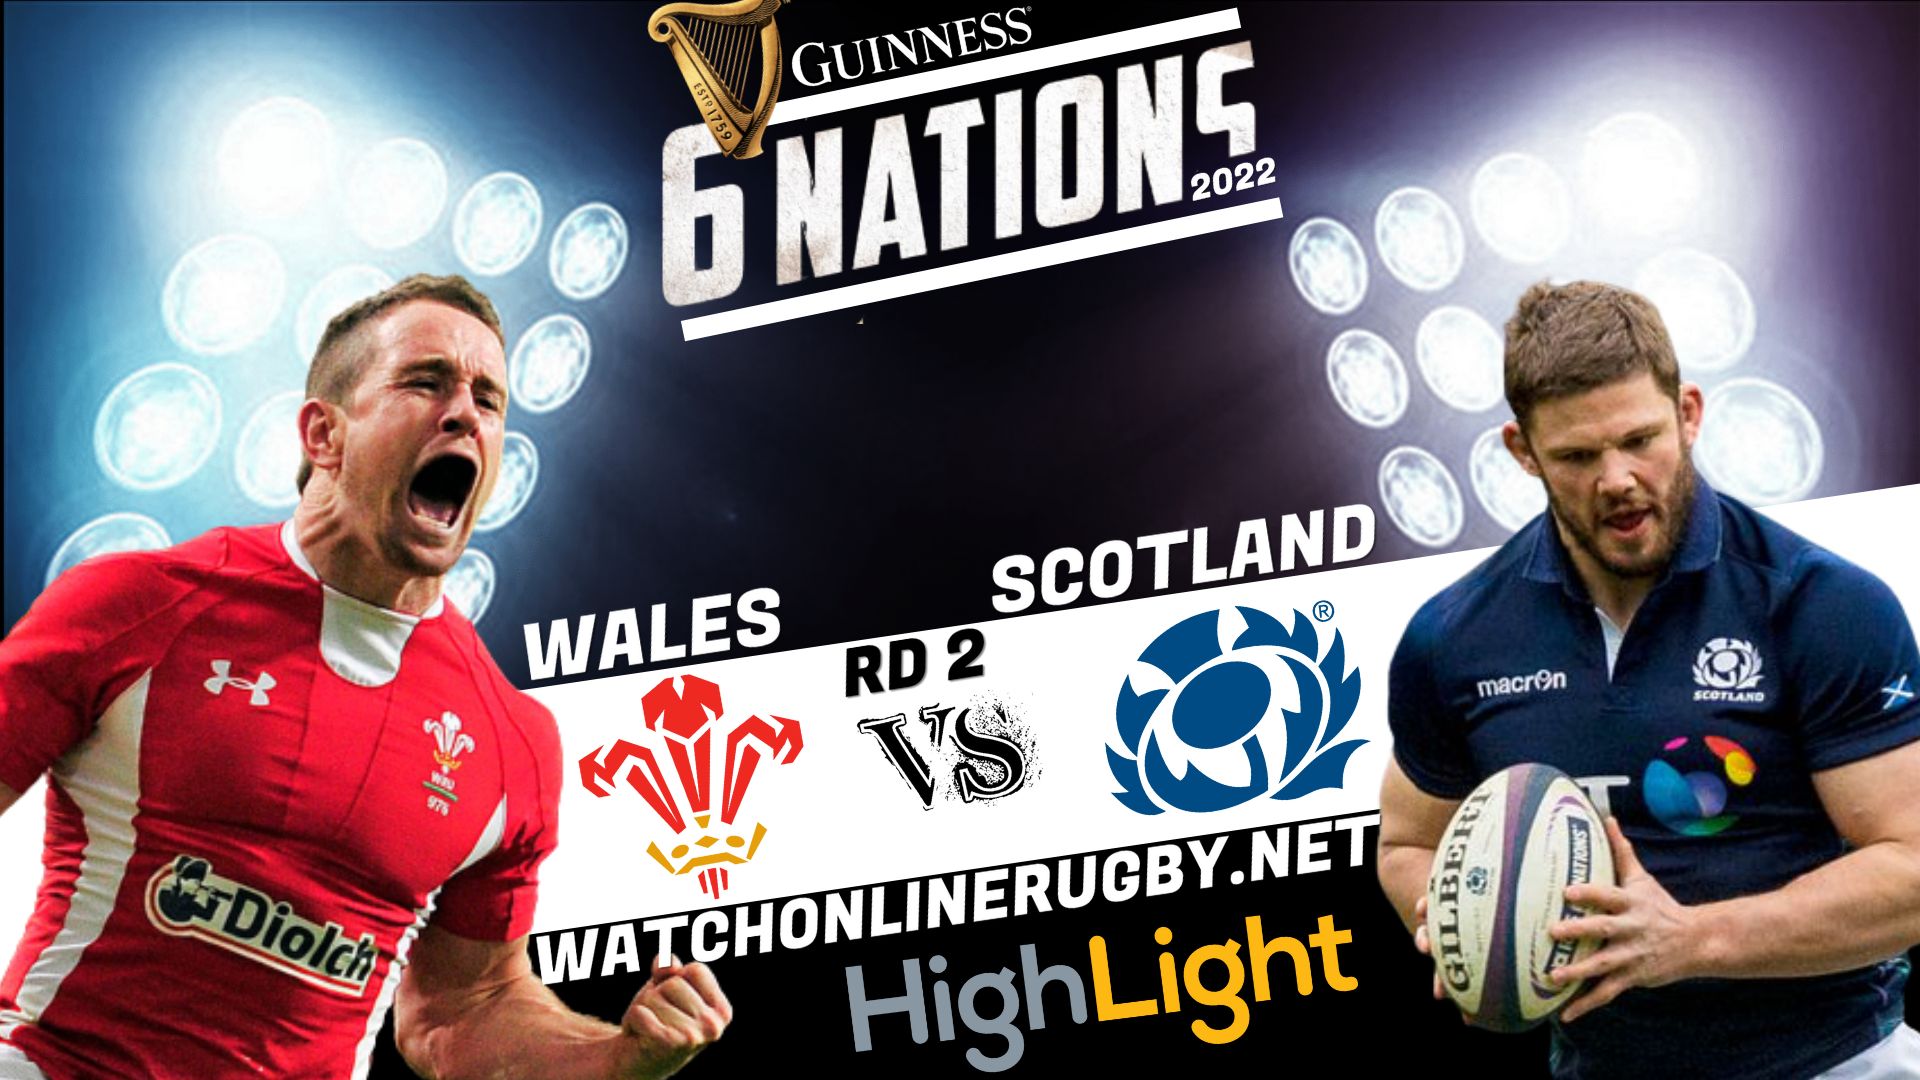 Wales Vs Scotland Six Nation Rugby 2022 RD 2